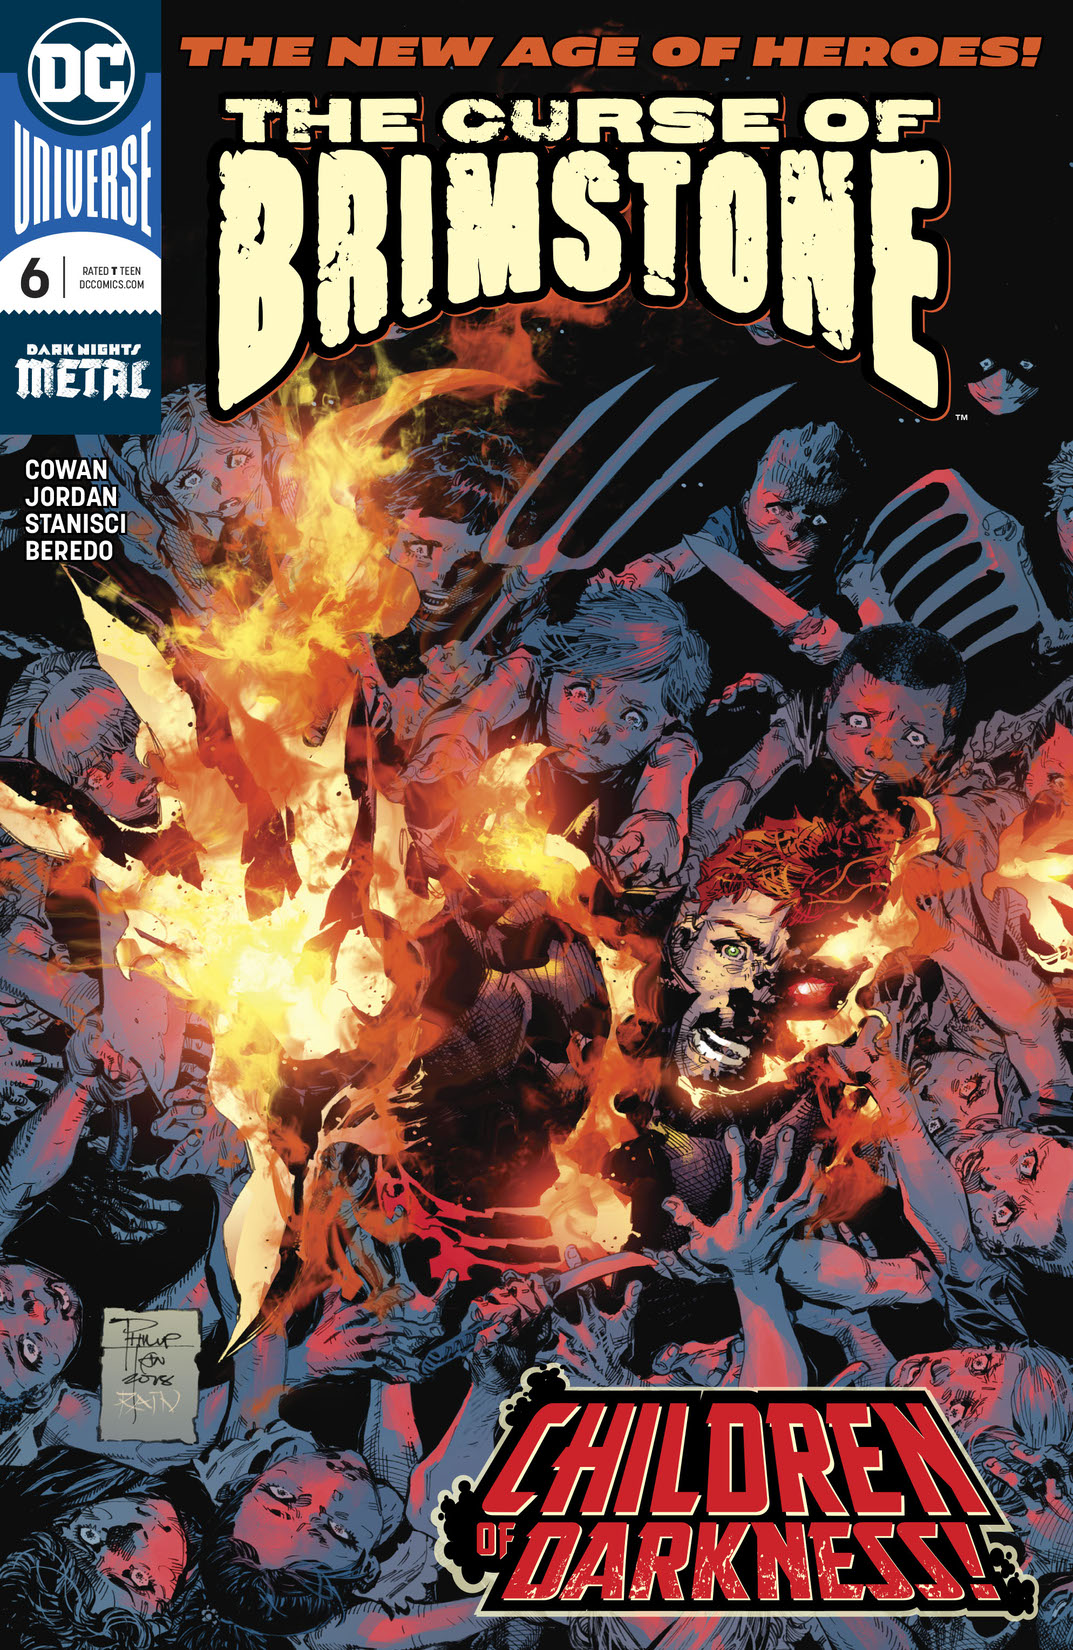 The Curse of Brimstone #6 preview images